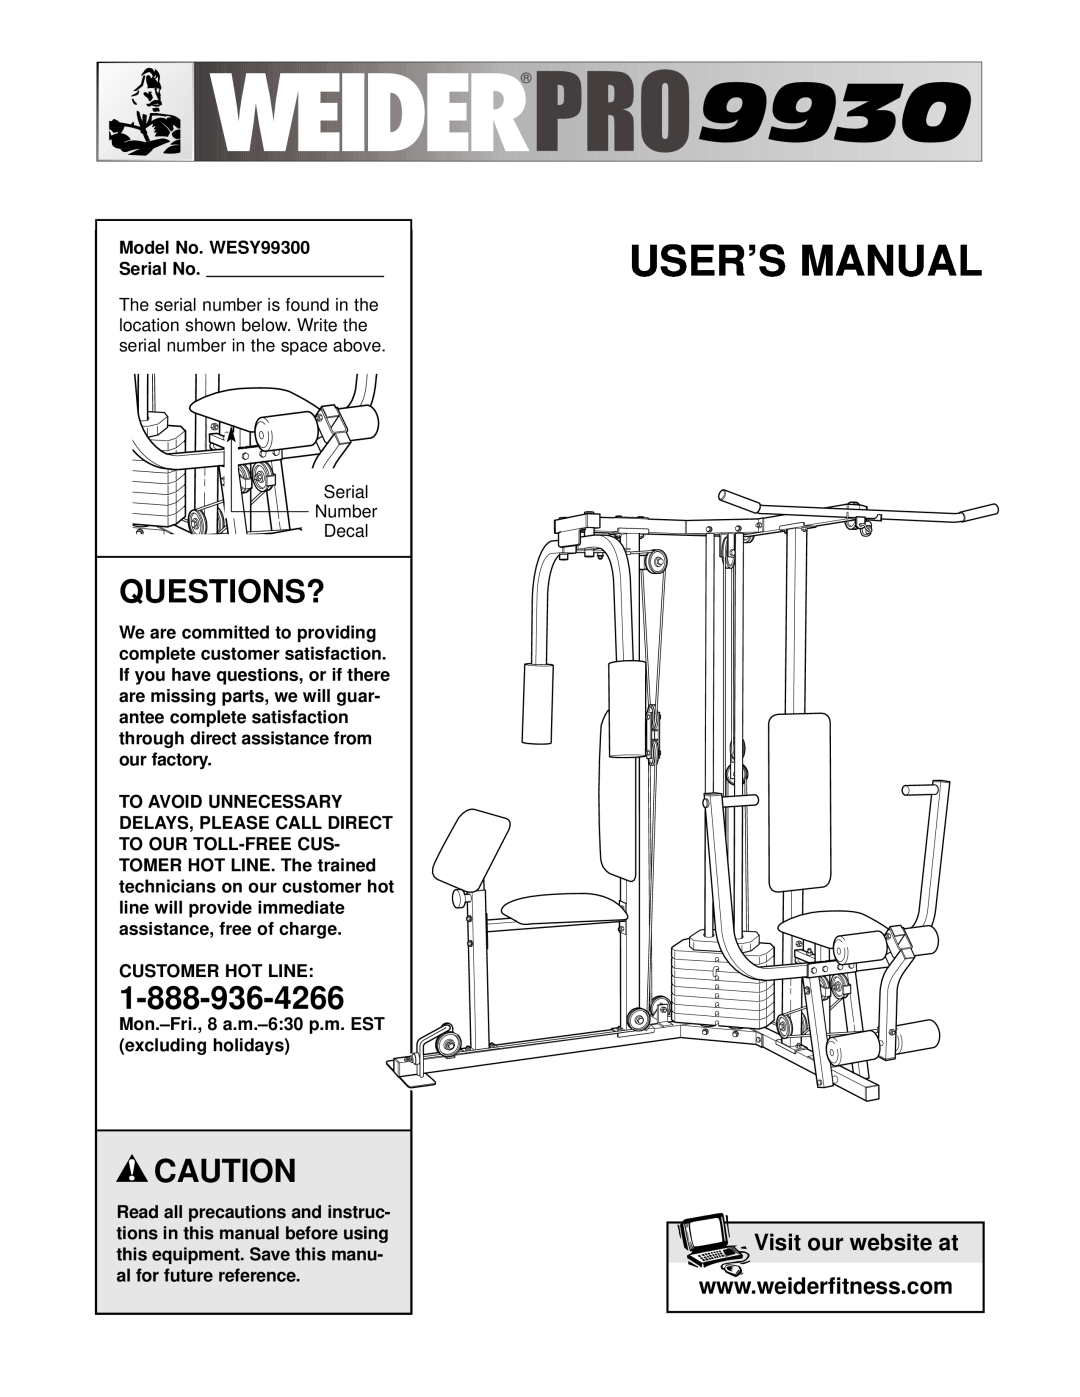 Weider user manual Questions?, User’S Manual, Visit our website at, Model No. WESY99300 Serial No, our factory 